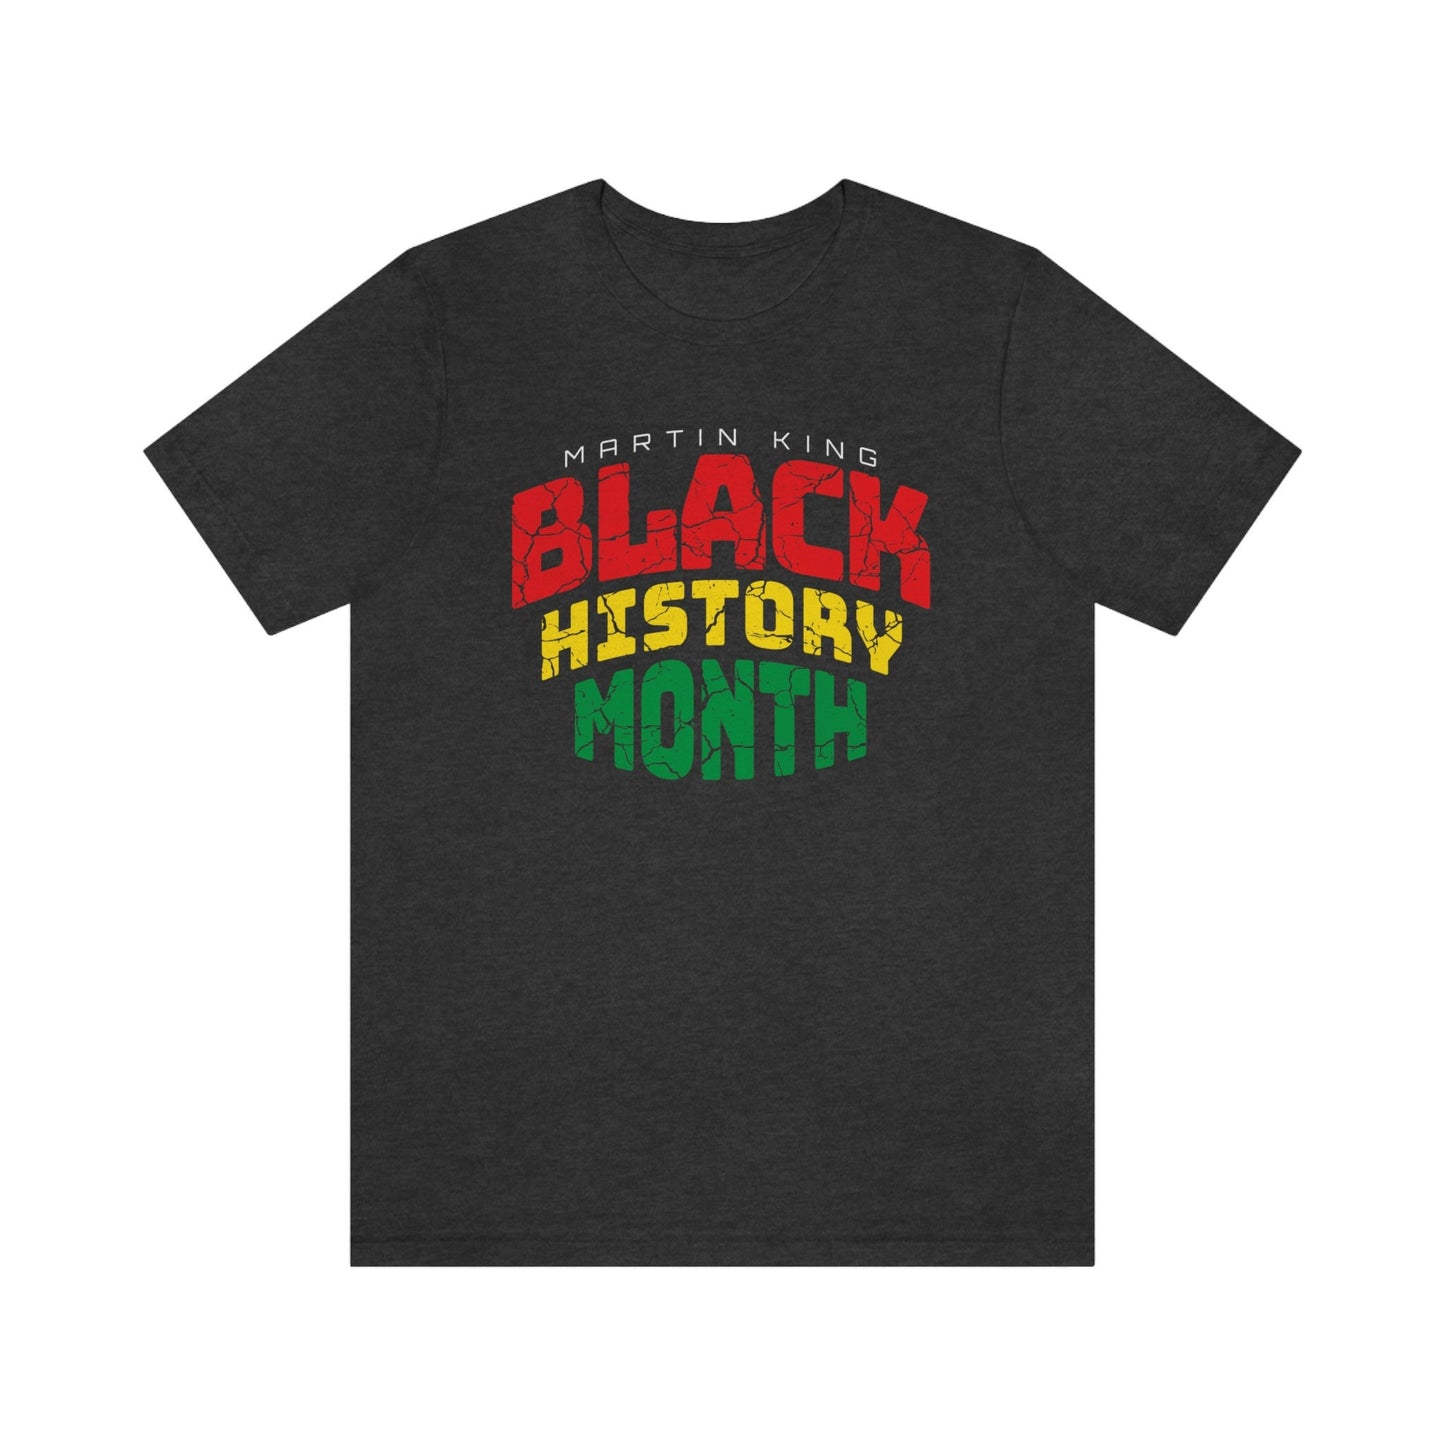 Black History Month t-shirt personalized with your name, Black Lives Matter